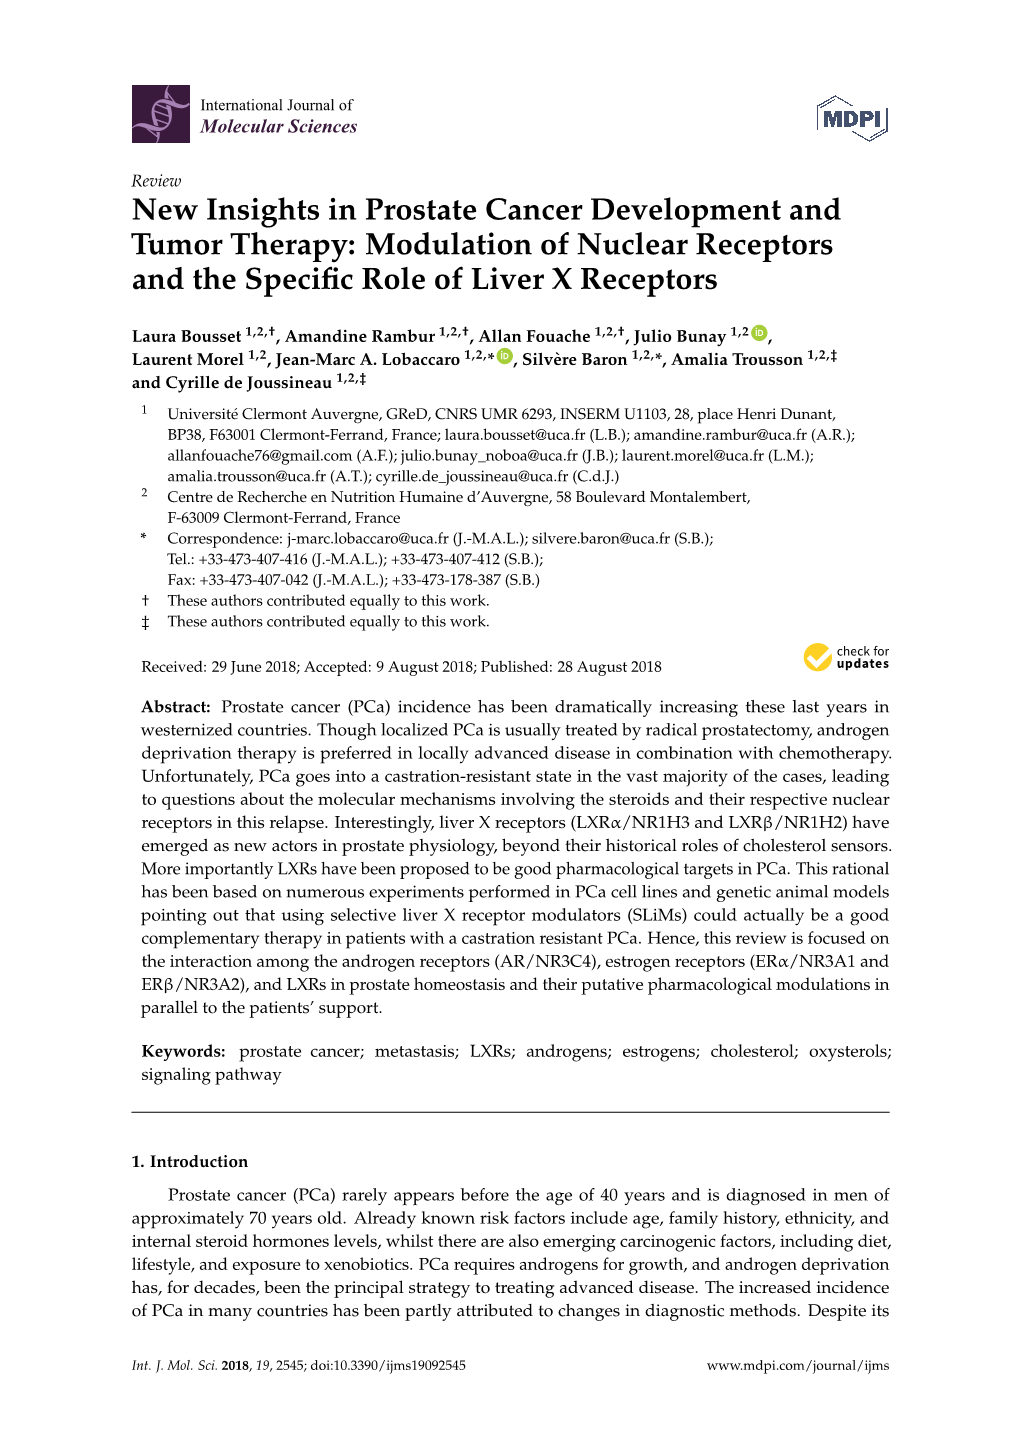 New Insights in Prostate Cancer Development and Tumor Therapy: Modulation of Nuclear Receptors and the Speciﬁc Role of Liver X Receptors